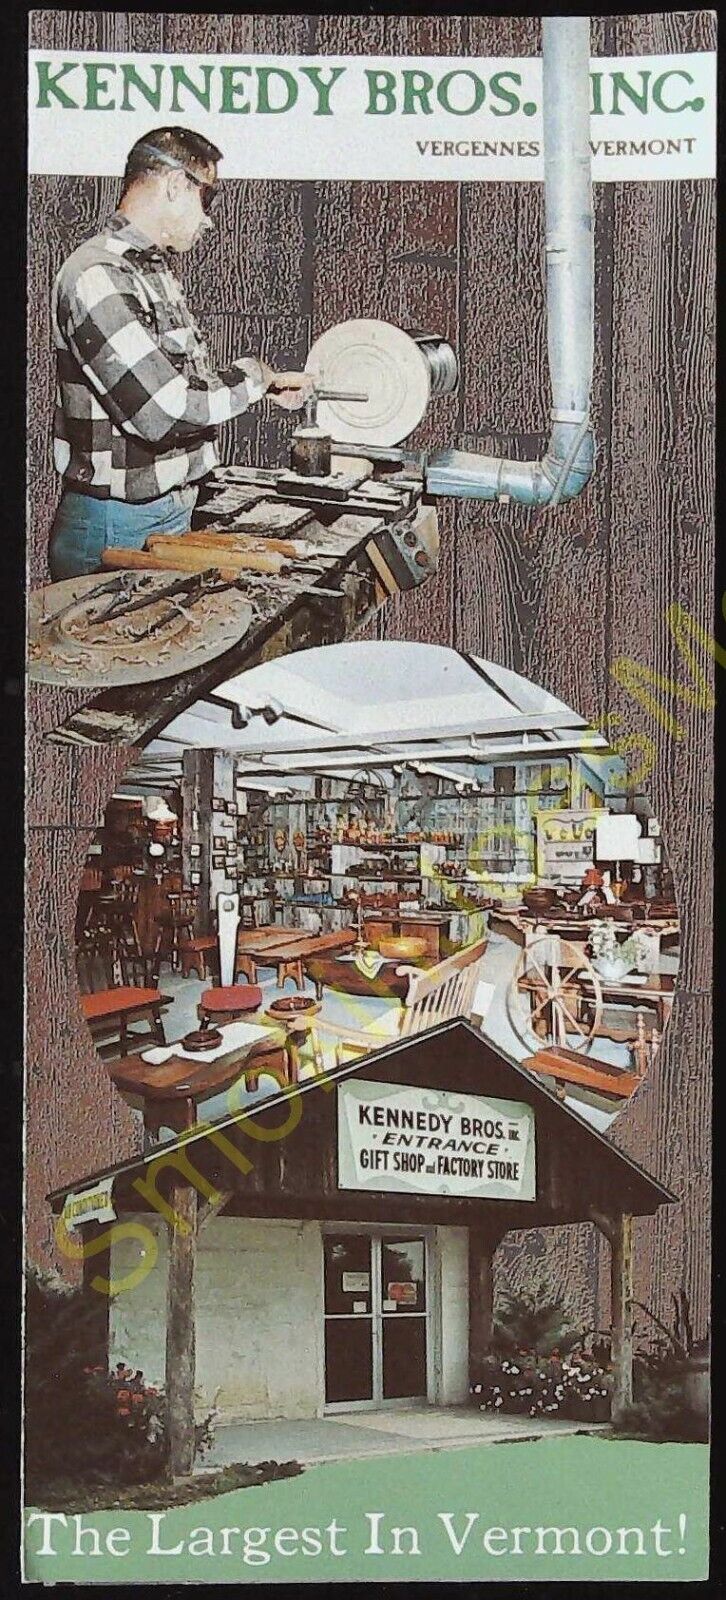 Kennedy Bros. Inc Gift Shop and Factory Store Vergennes Vermont Vintage Brochure